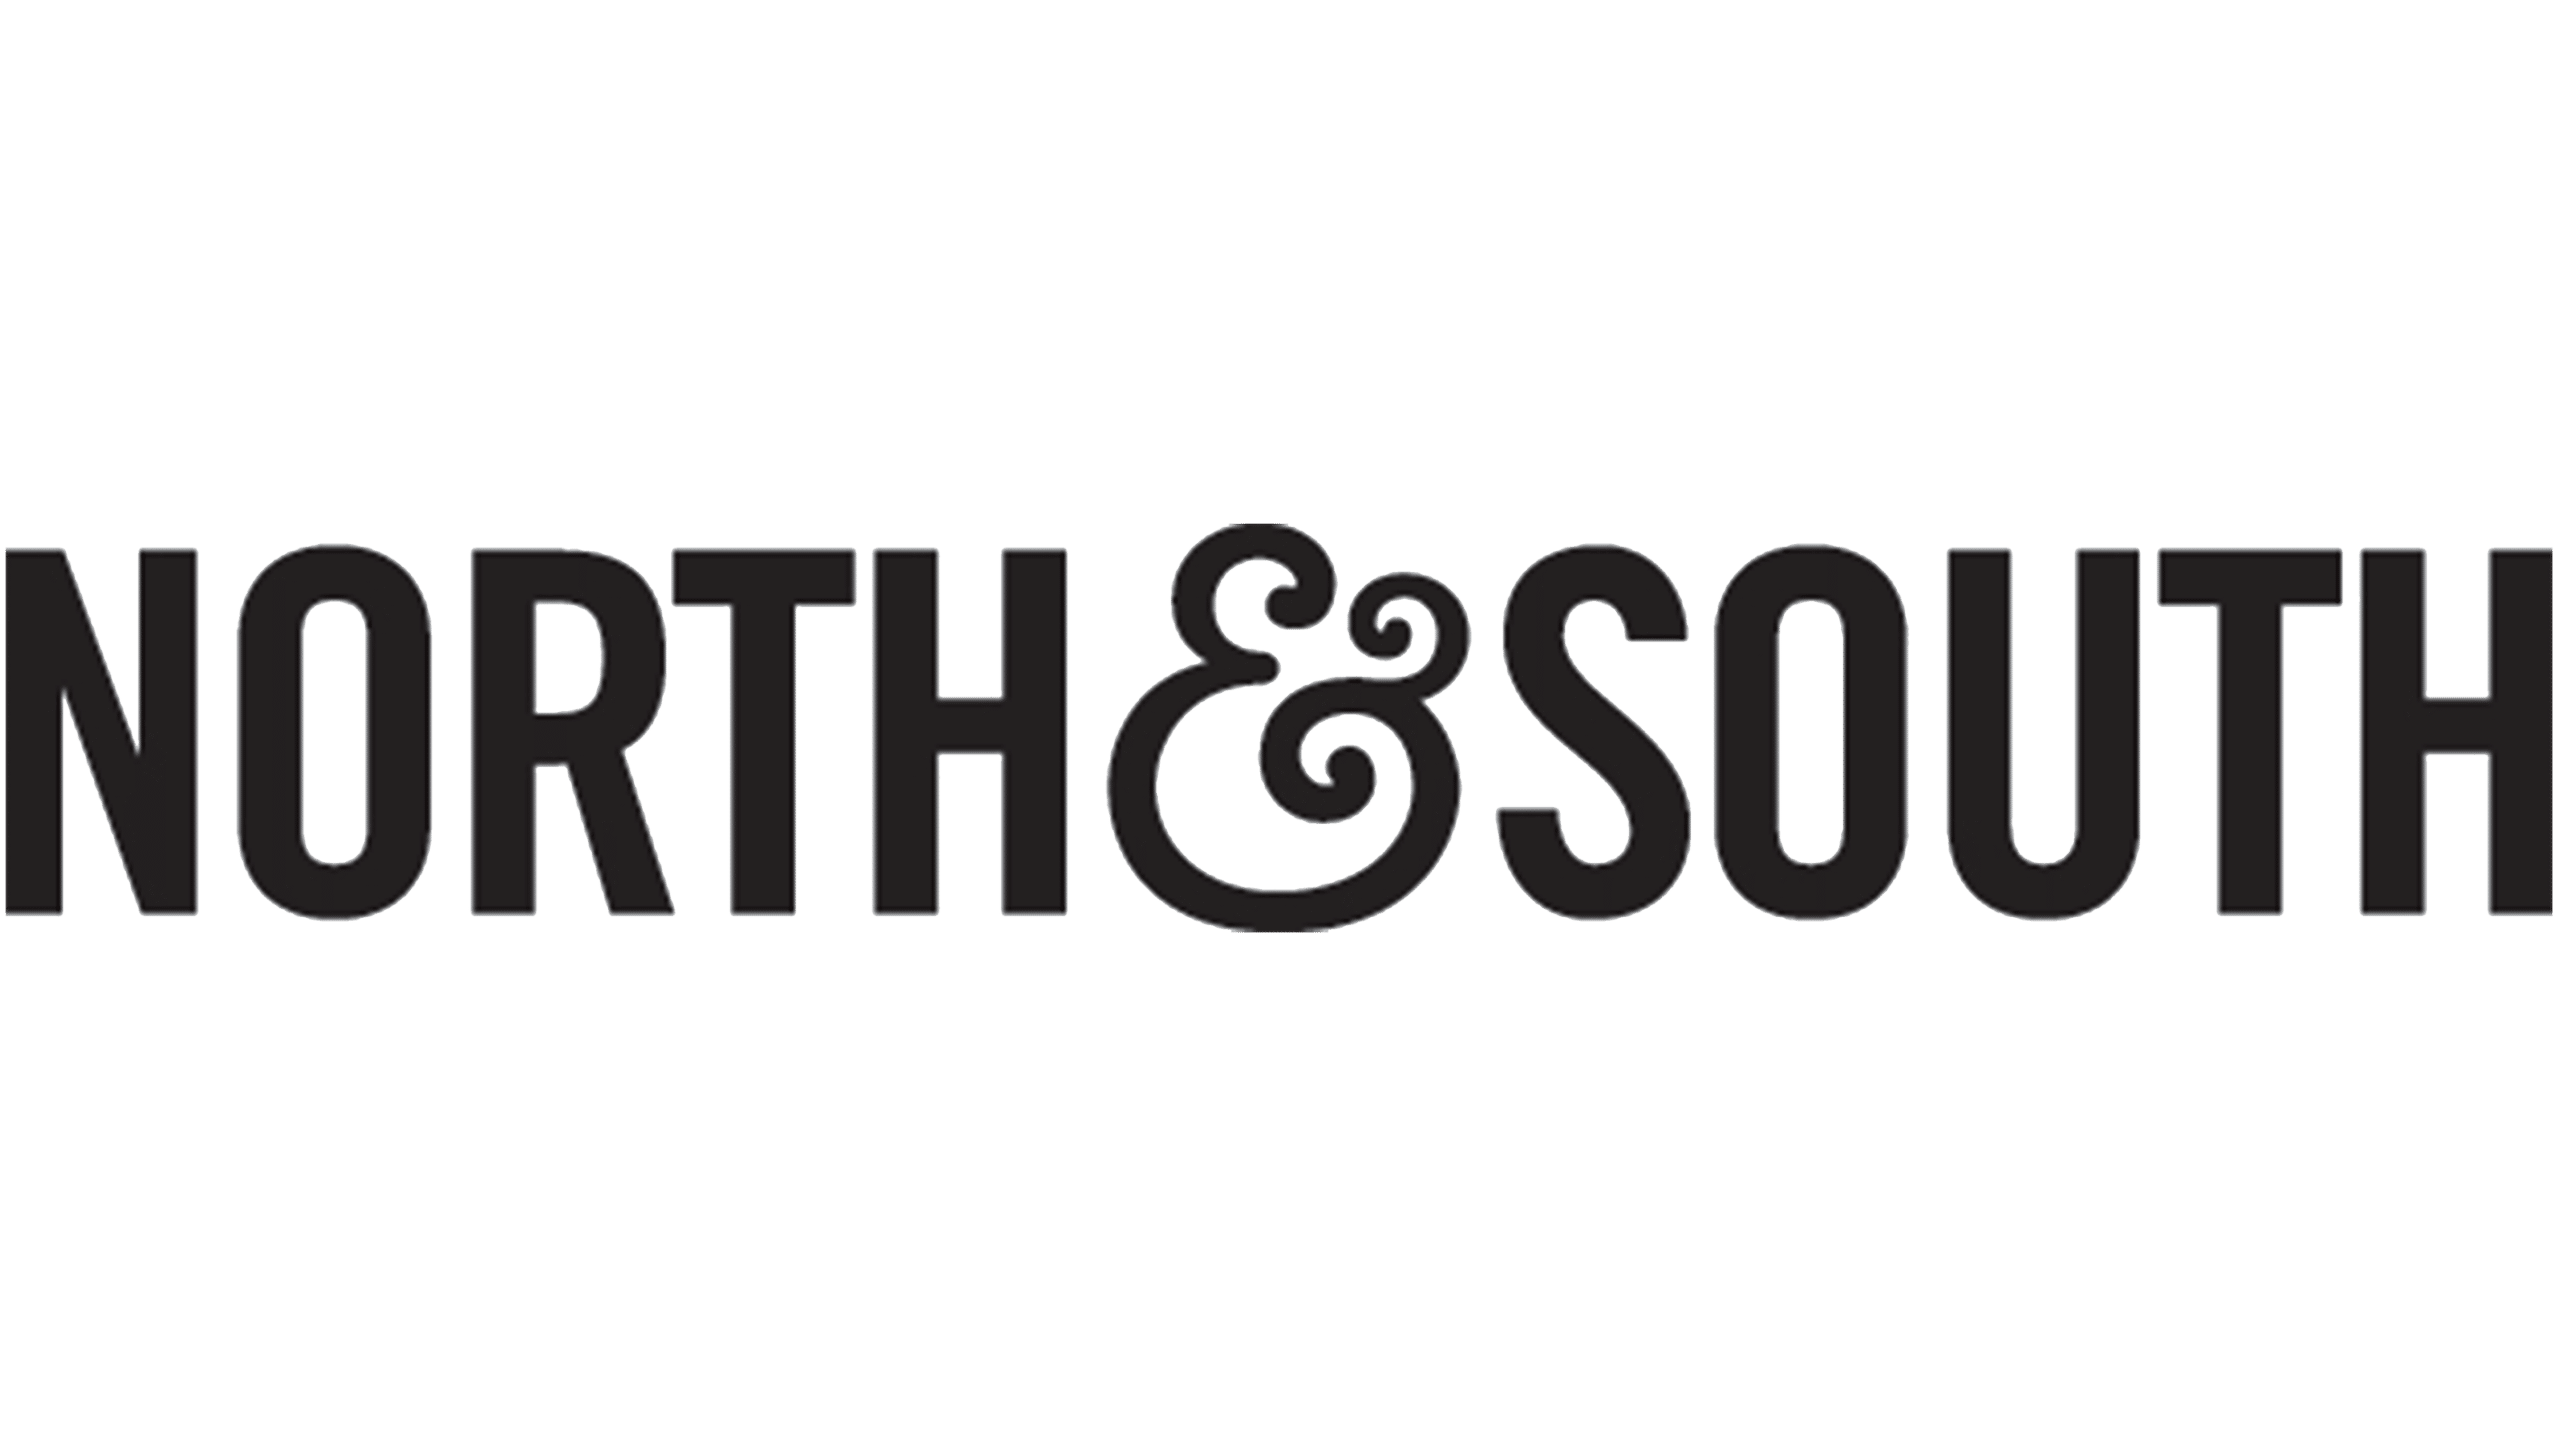 North and south